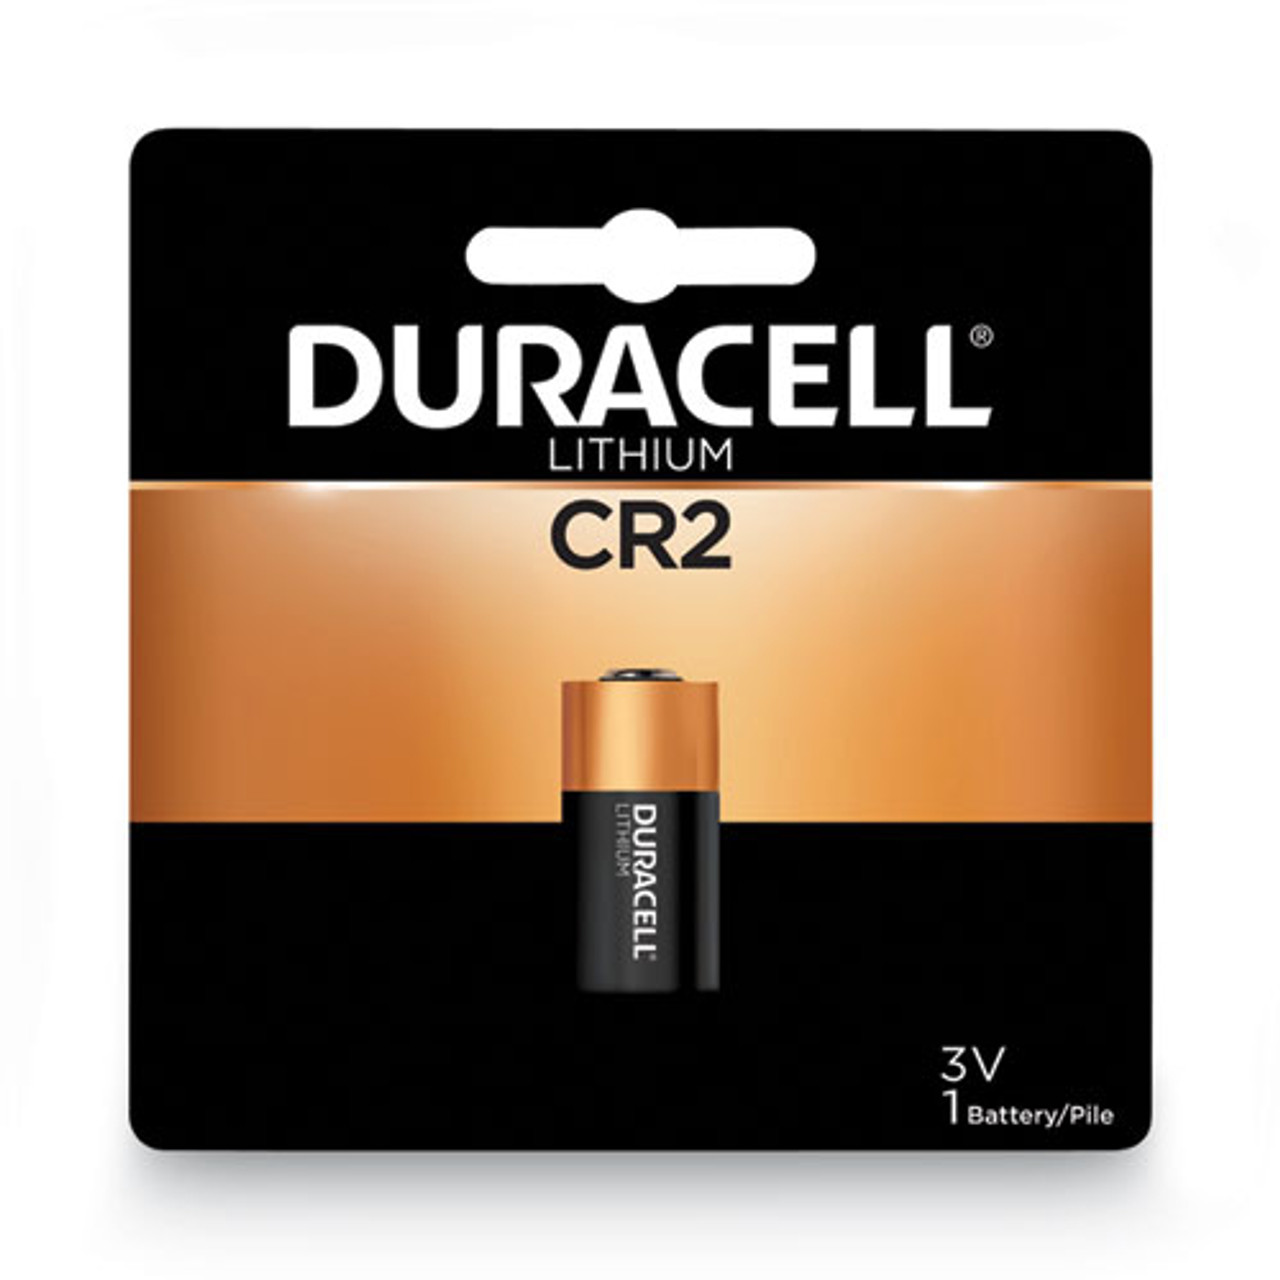 Duracell, Specialty High-Power Lithium Battery, Cr2, 3 V (DURDLCR2BPK)